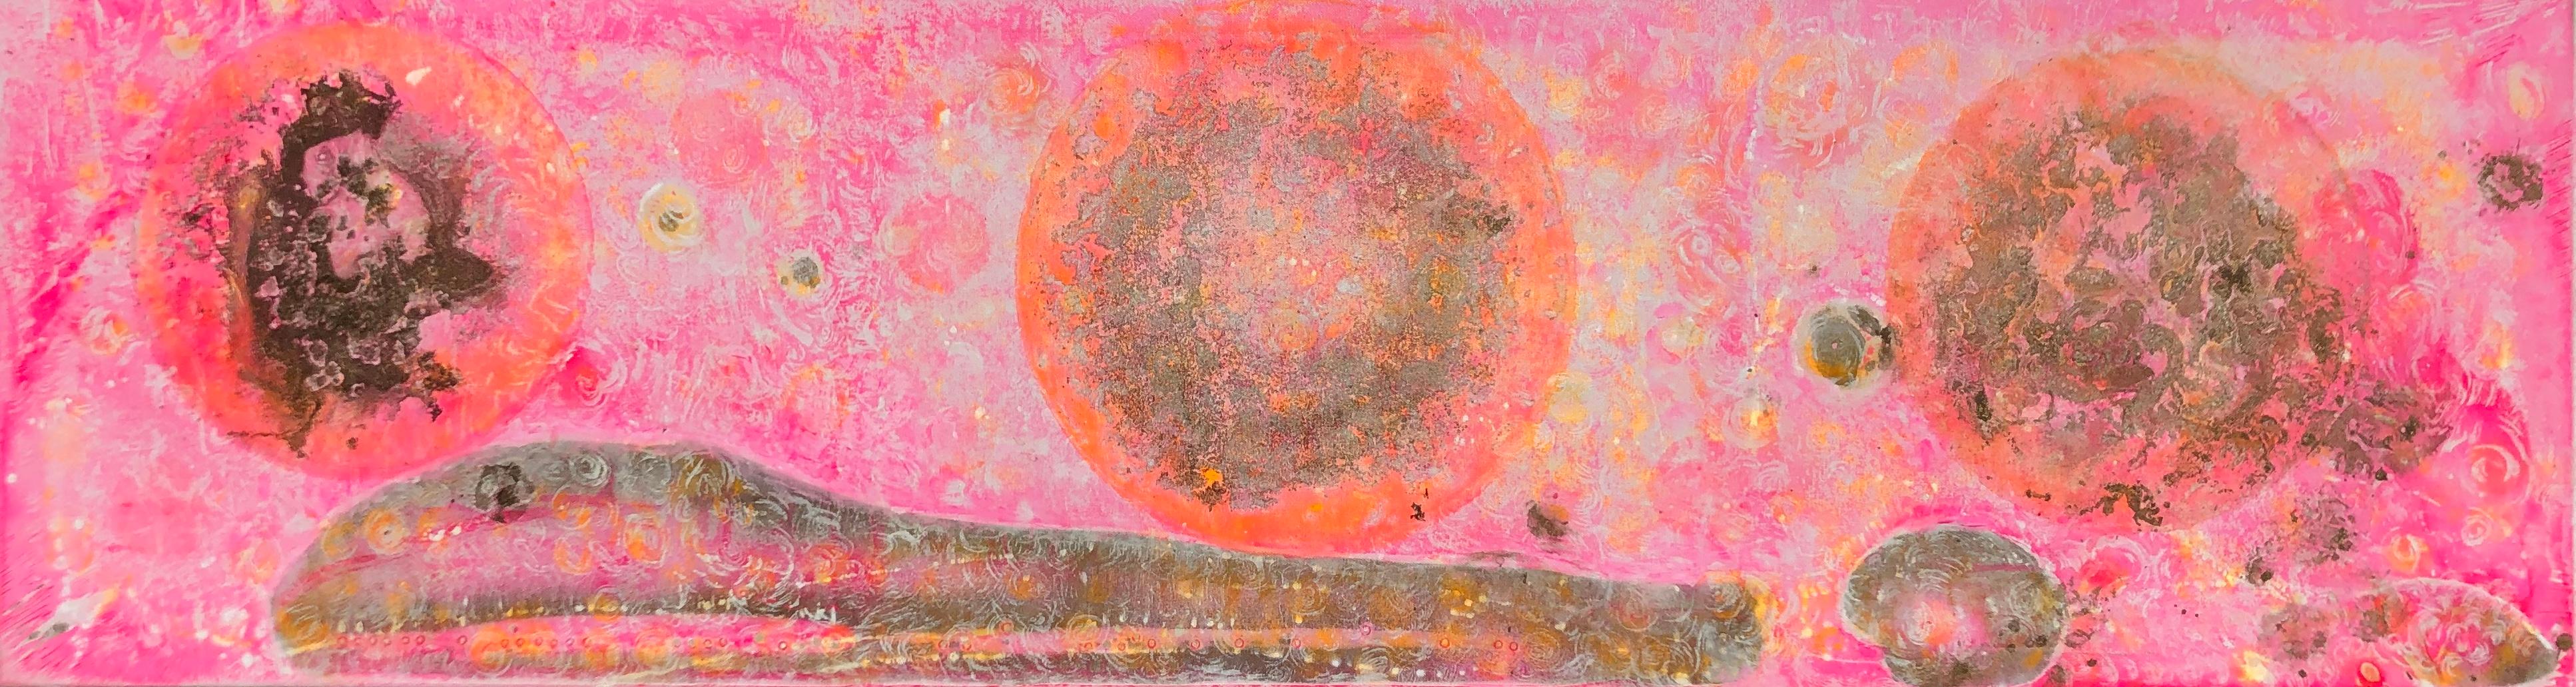 Morning levitation 3 - Painting on canvas, abstract metaphysical, gold, pink im Angebot 6